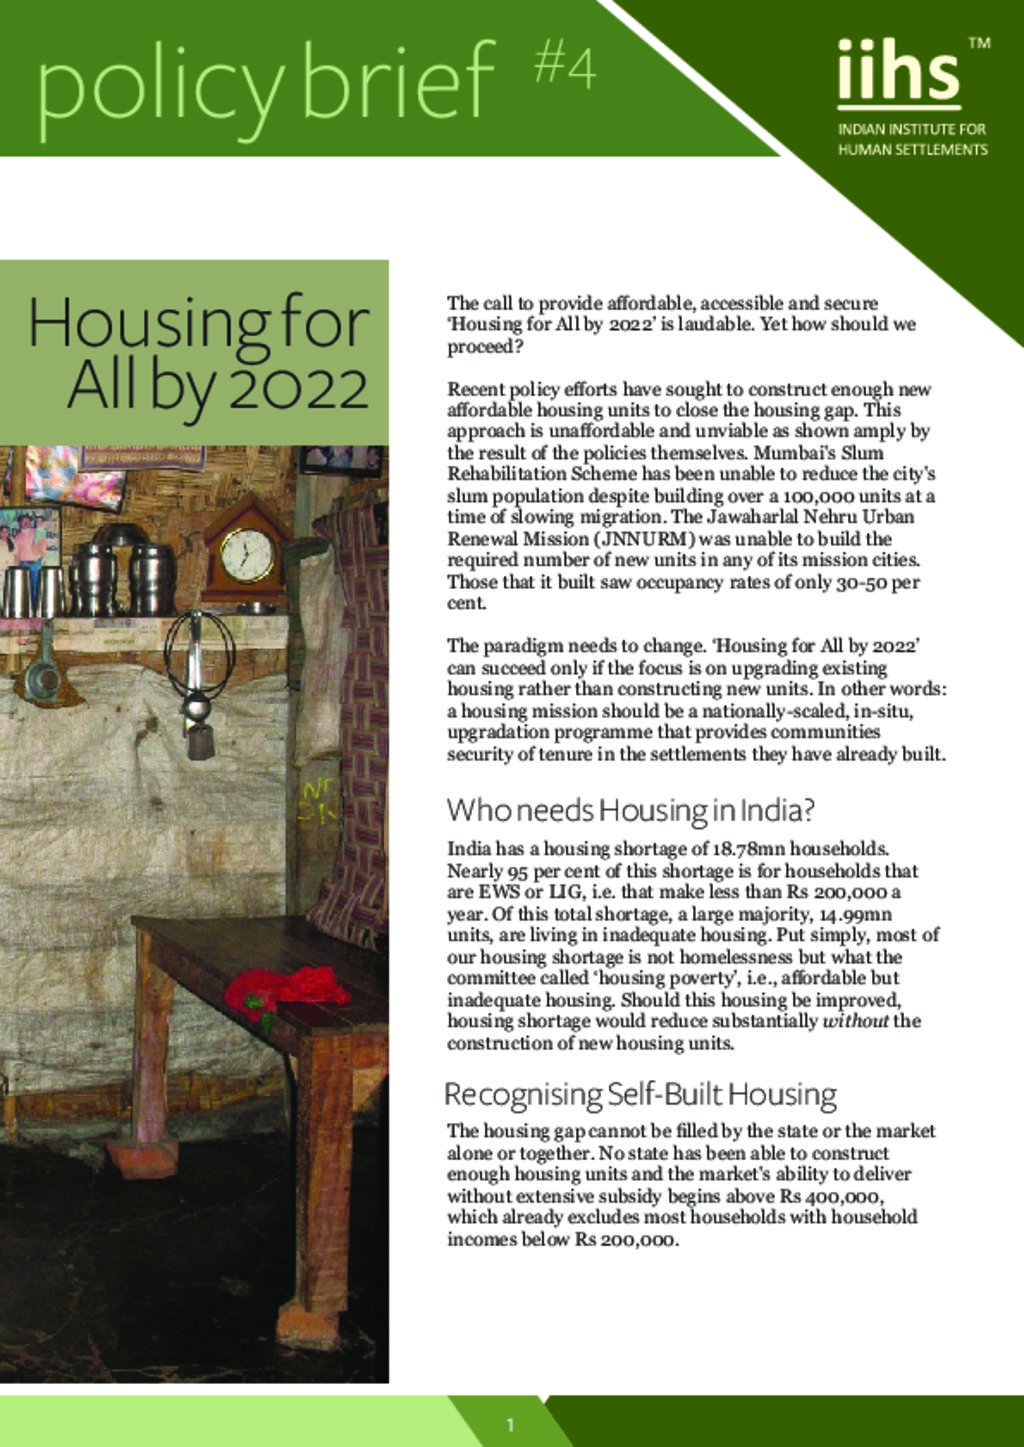 Housing for All by 2022